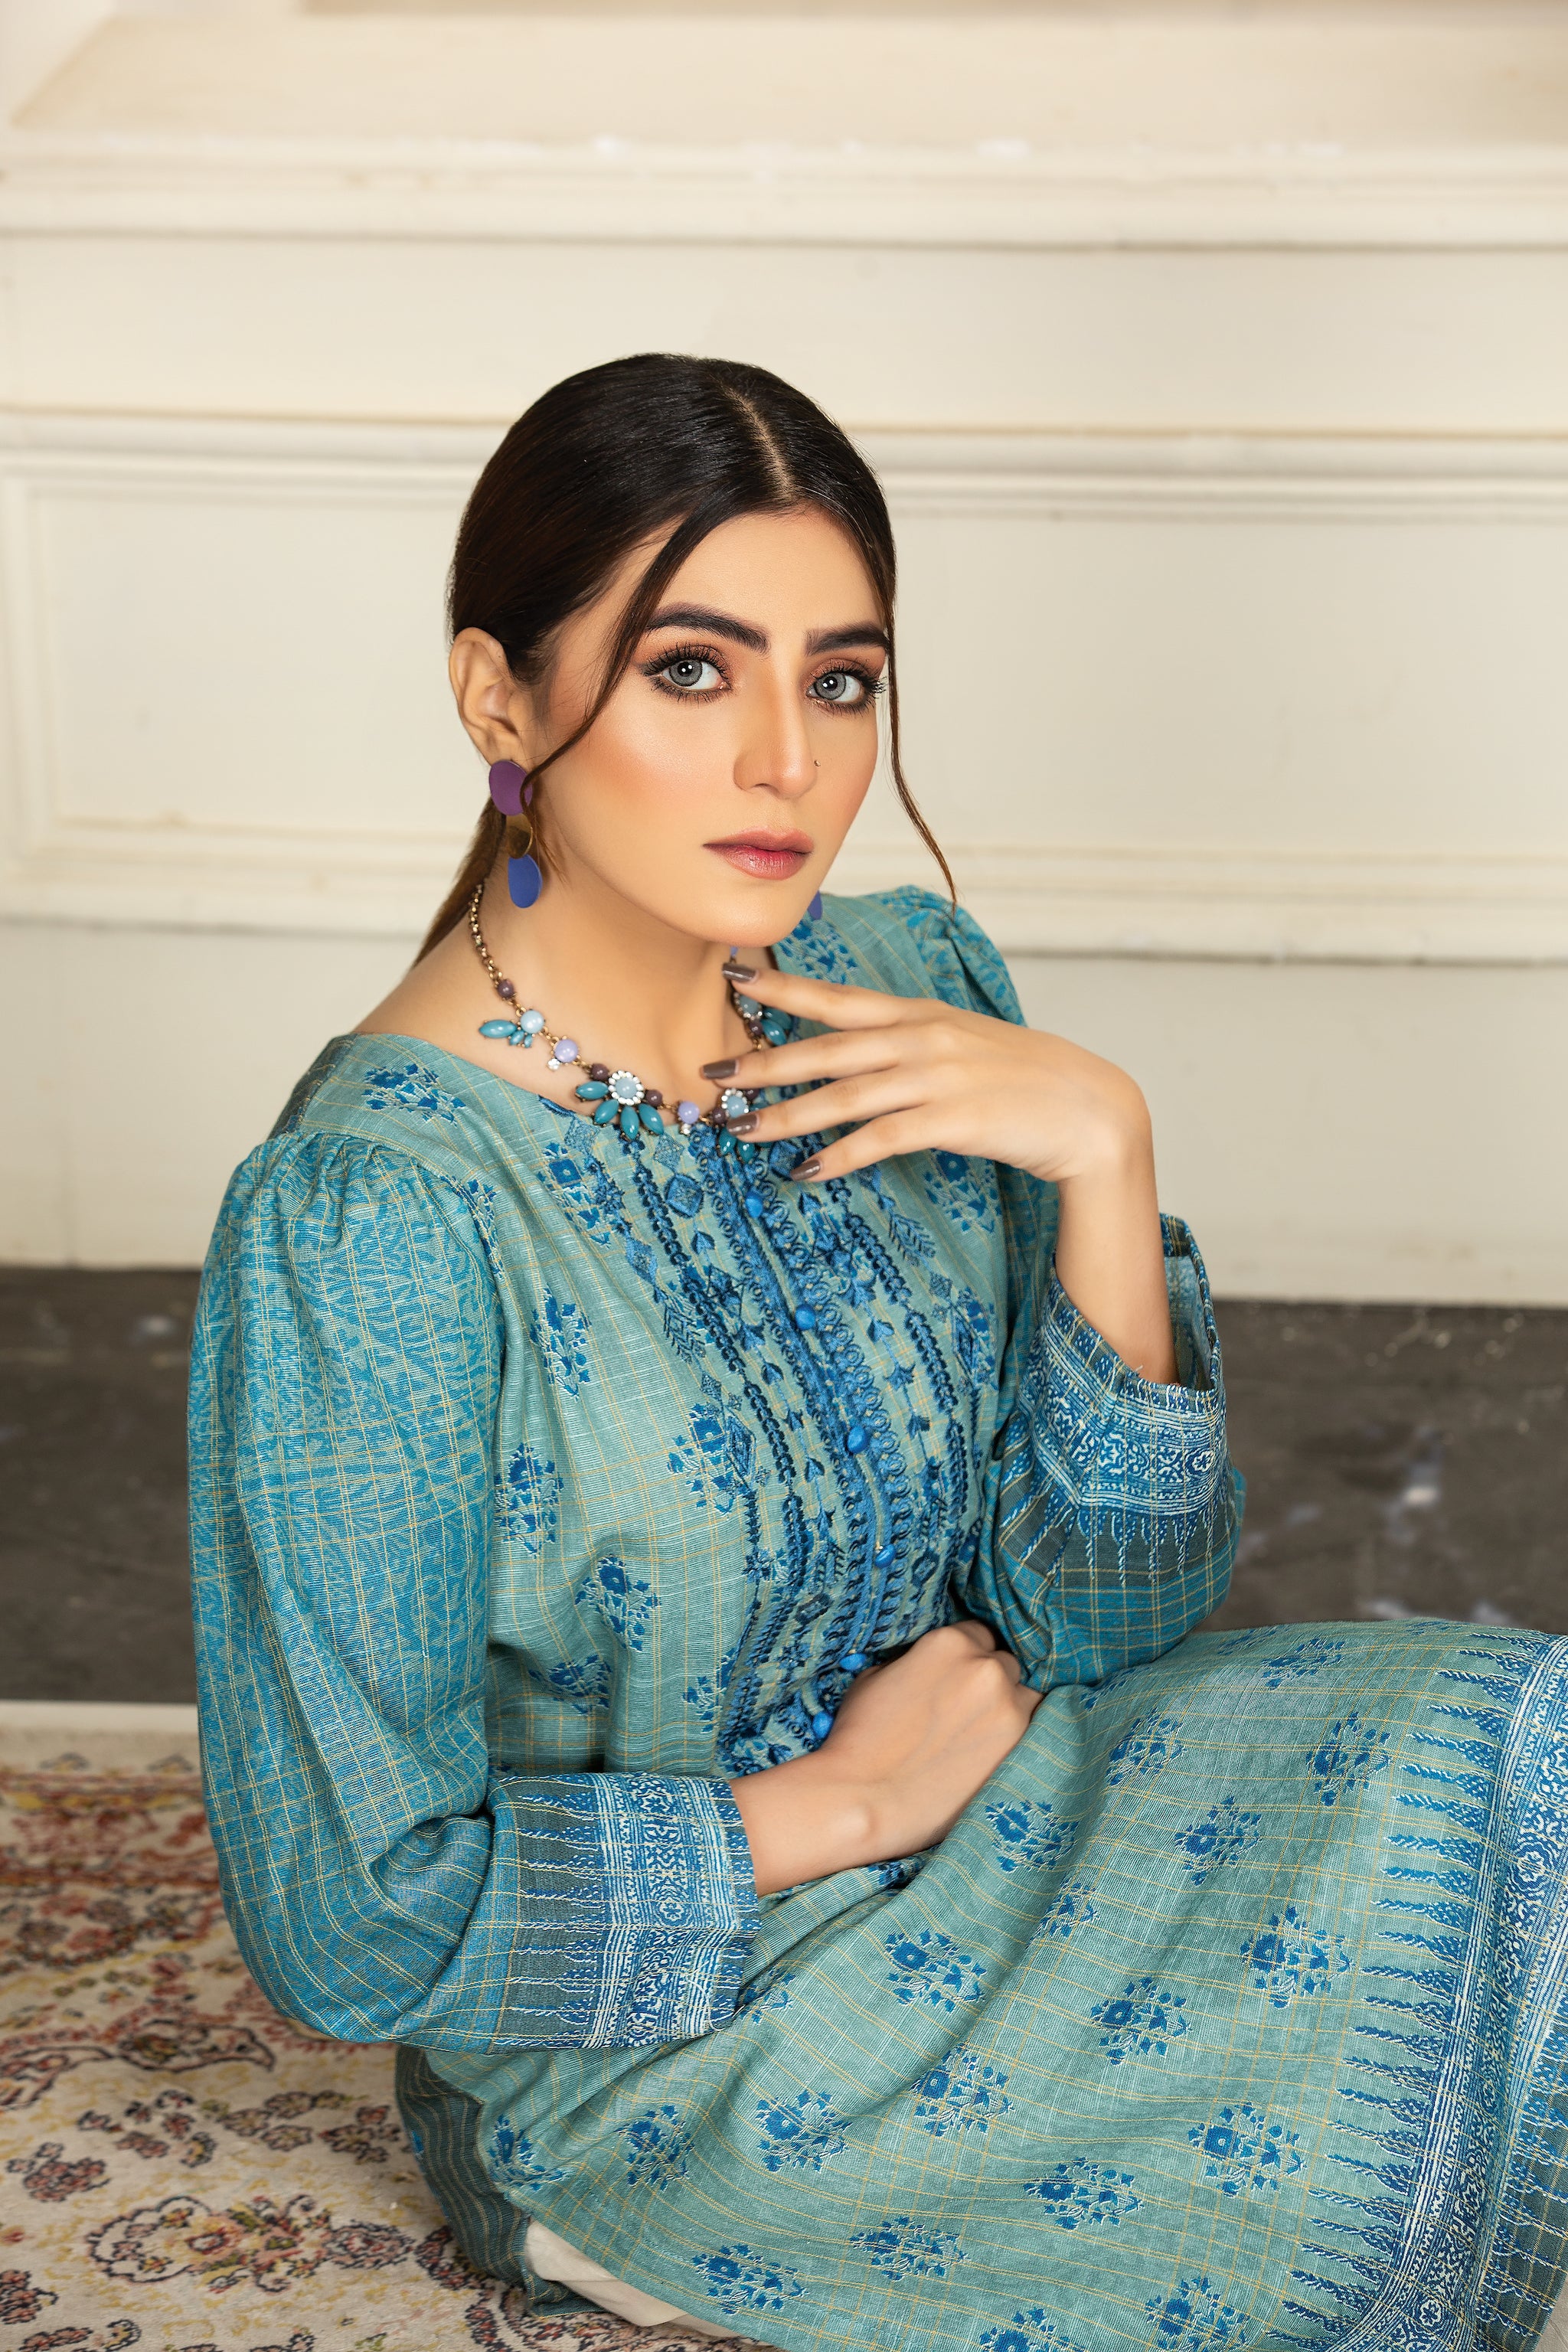 ZAVIYA COLLECTION / 1PC / DIGITAL PRINTED EMBROIDERED KHADDAR SHIRT 1.75MTR PRICE 1225/- PKR WINTER 2022 COLLECTION BY SAFA NOOR